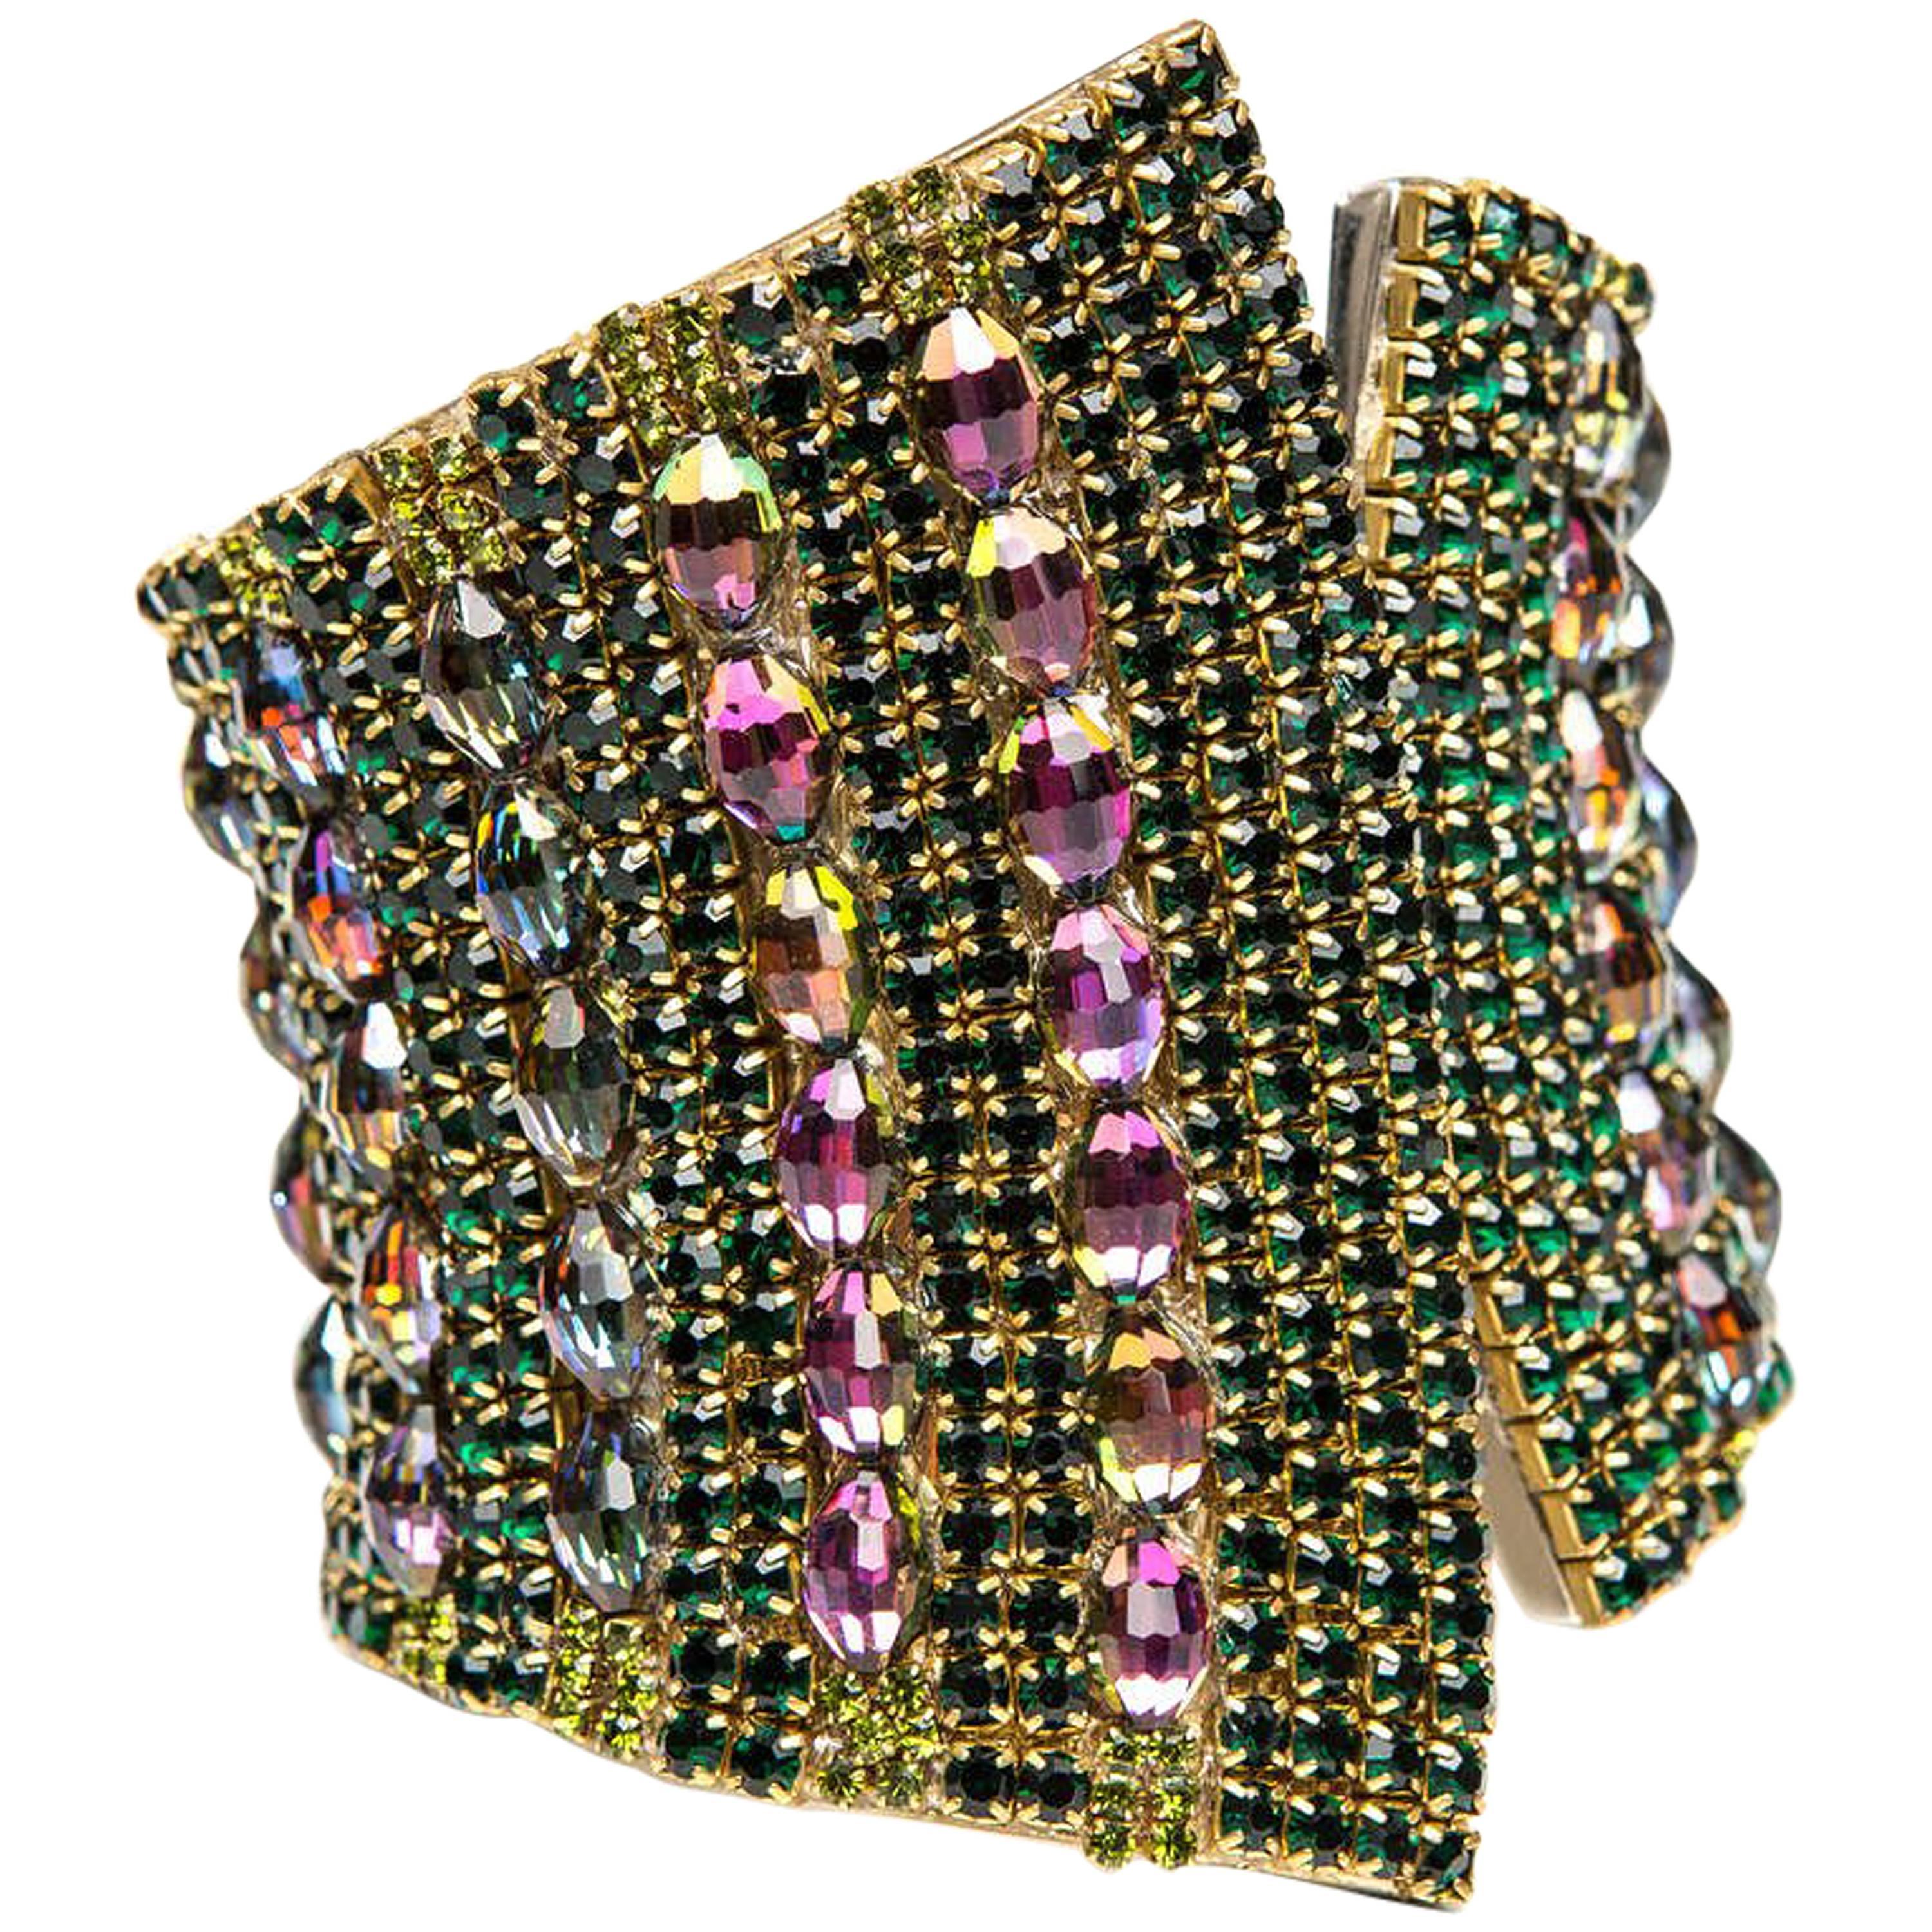  Handmade By Iris G Runway Emerald And Watermelon Crystal Clamp Cuff Bracelet For Sale